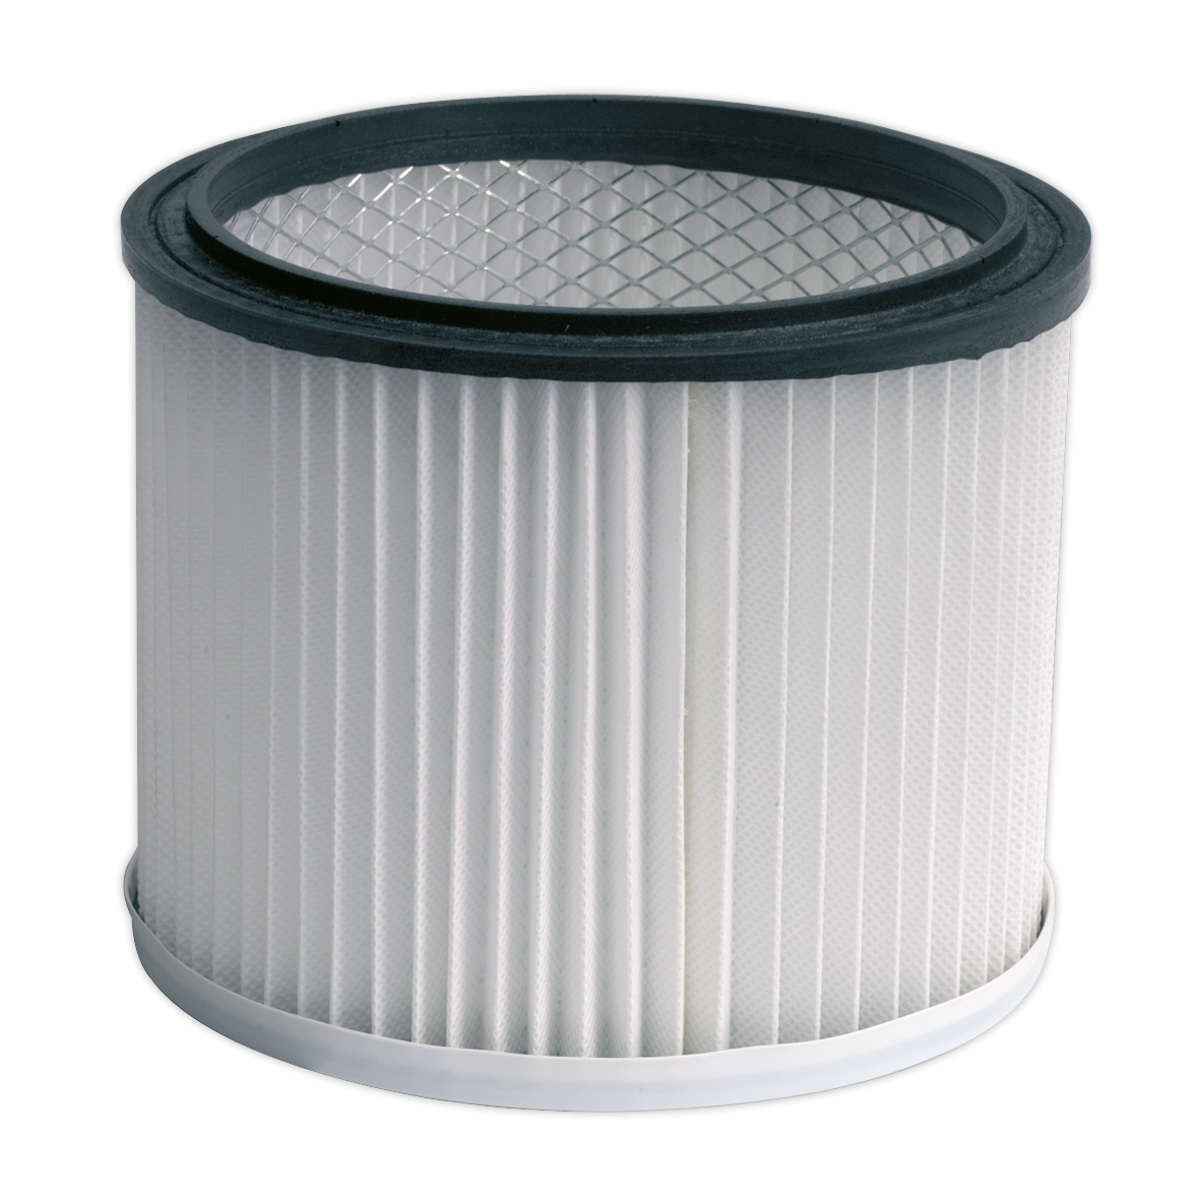 Sealey Cartridge Filter for PC310